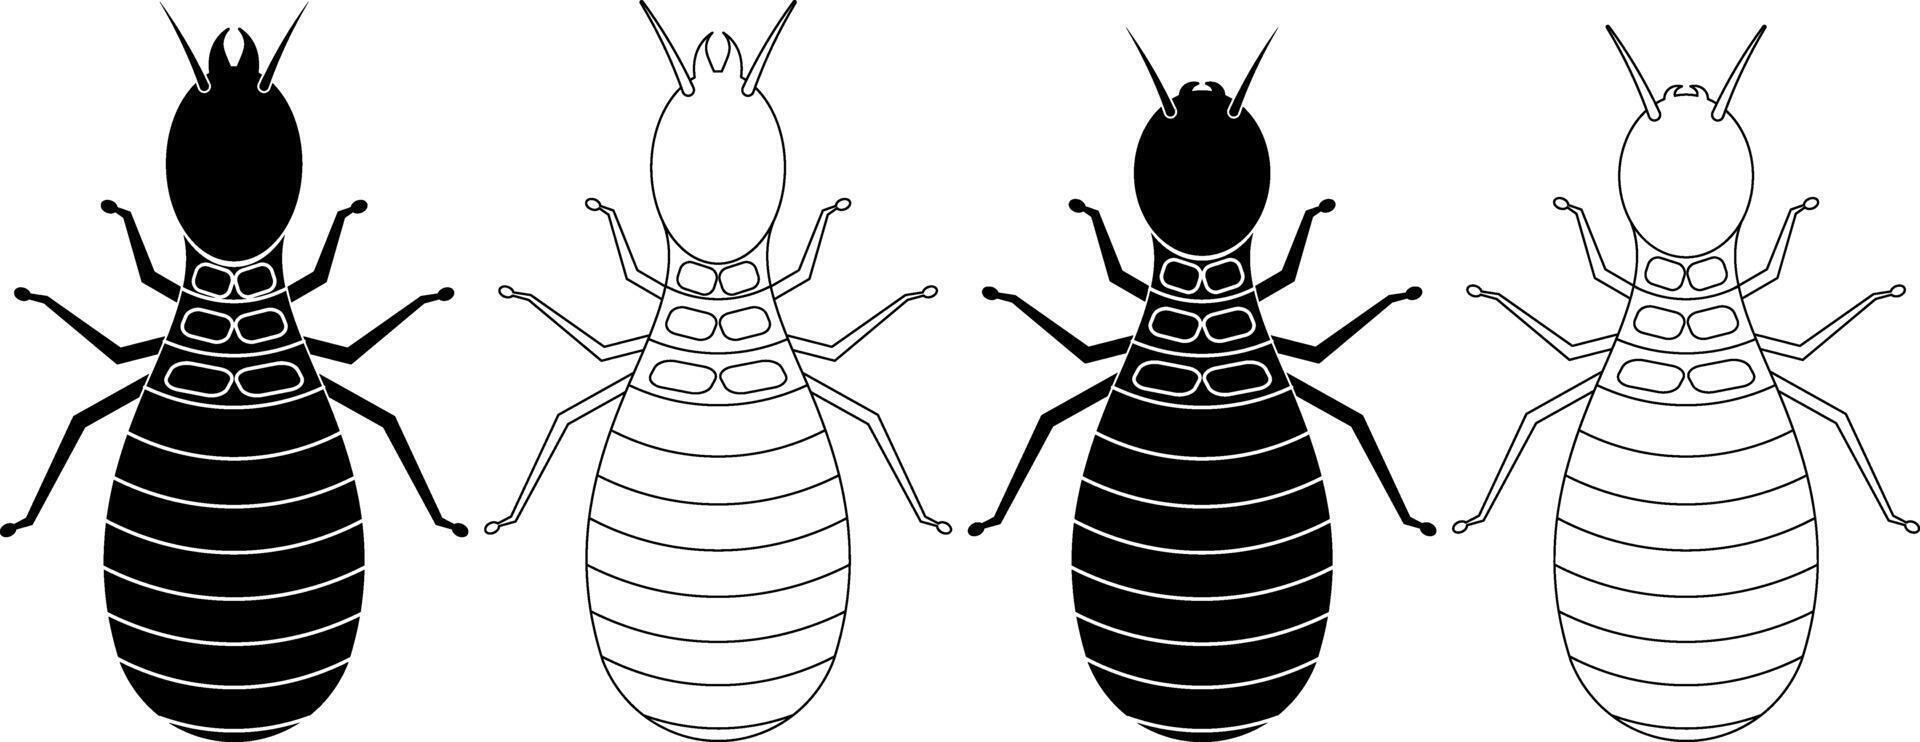 soldier and worker termite icon set vector